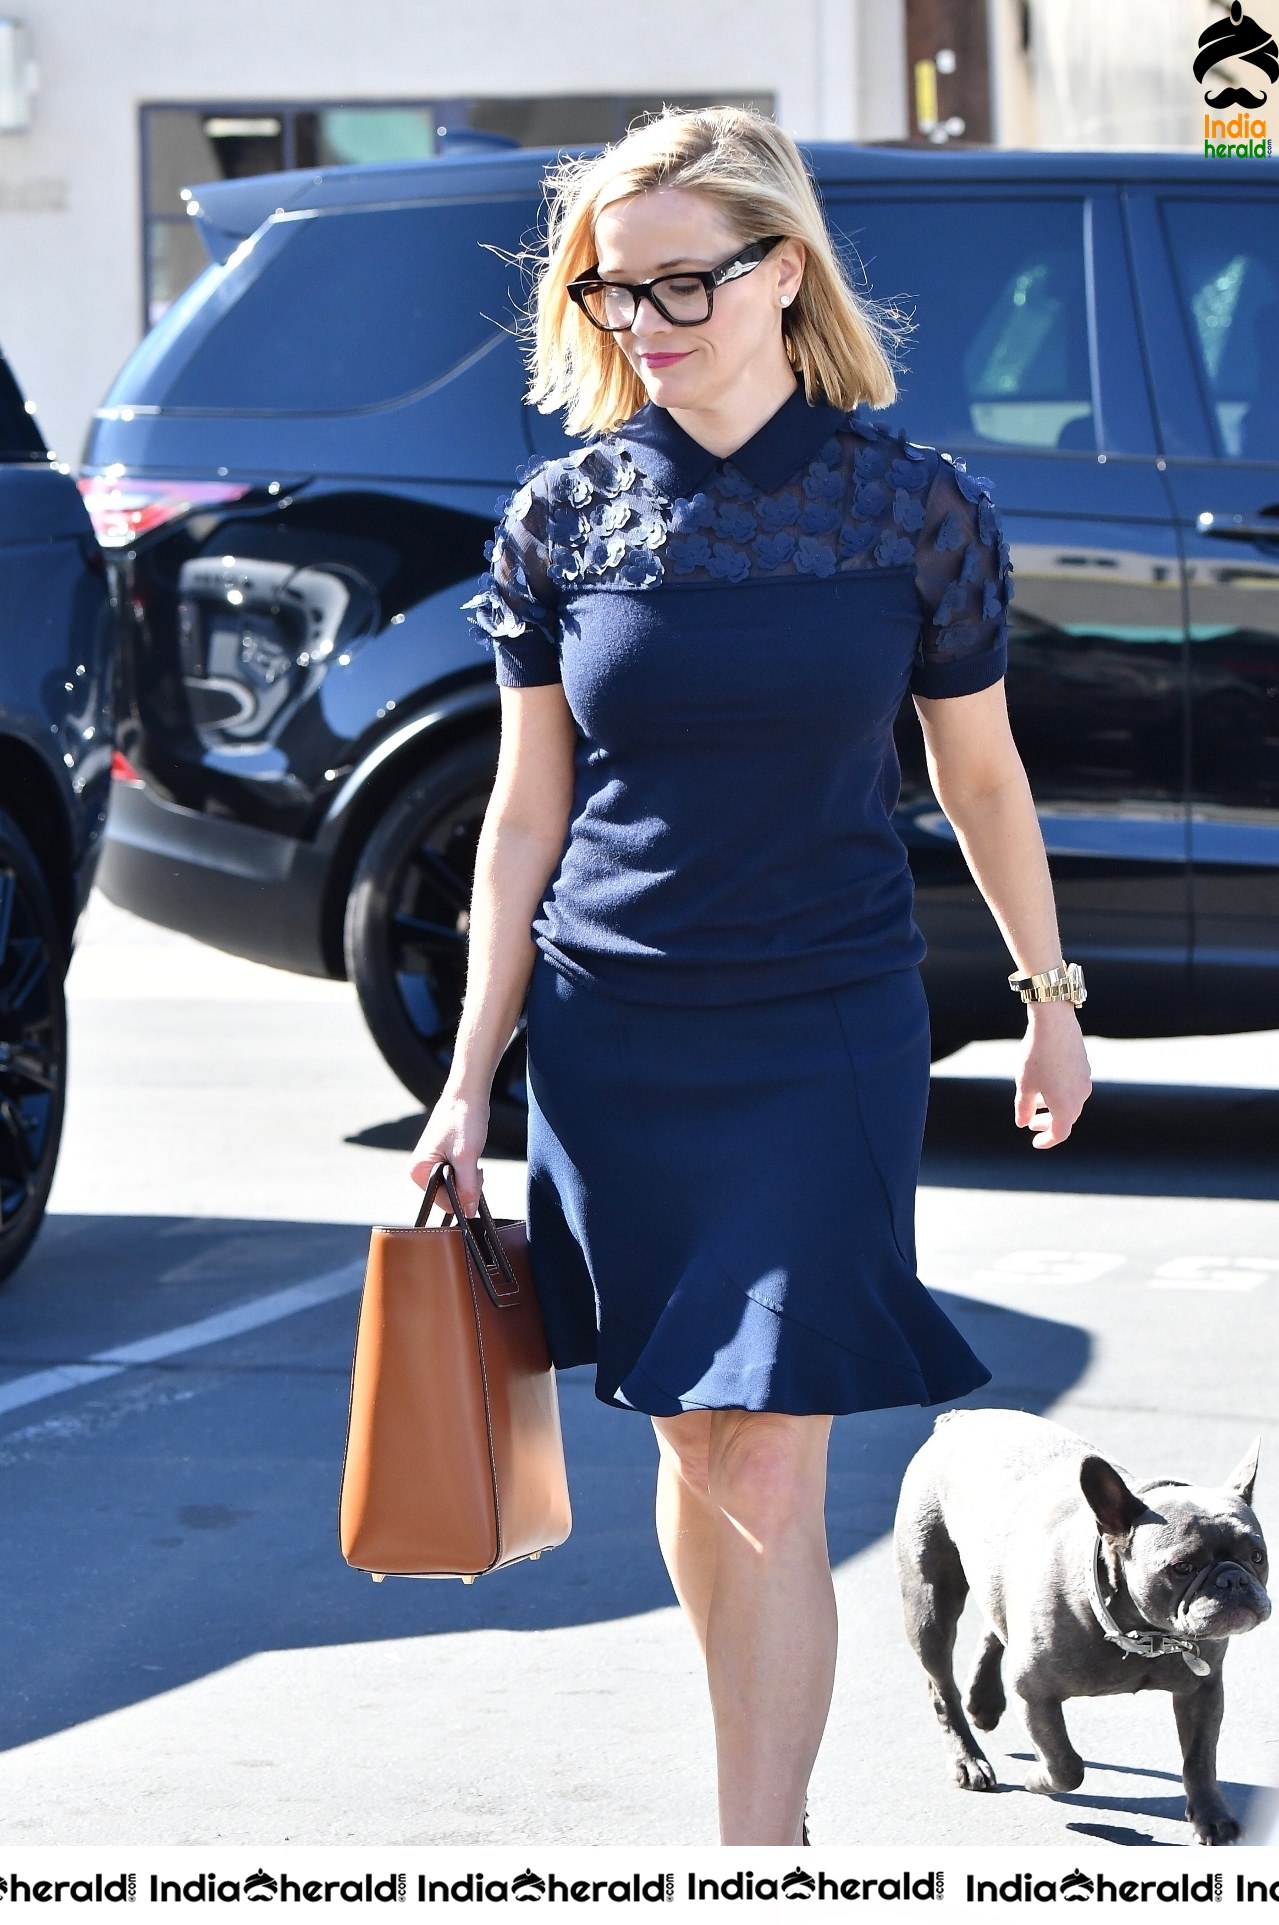 Reese Witherspoon caught by Paparazzi while out in Brentwood CA Set 2